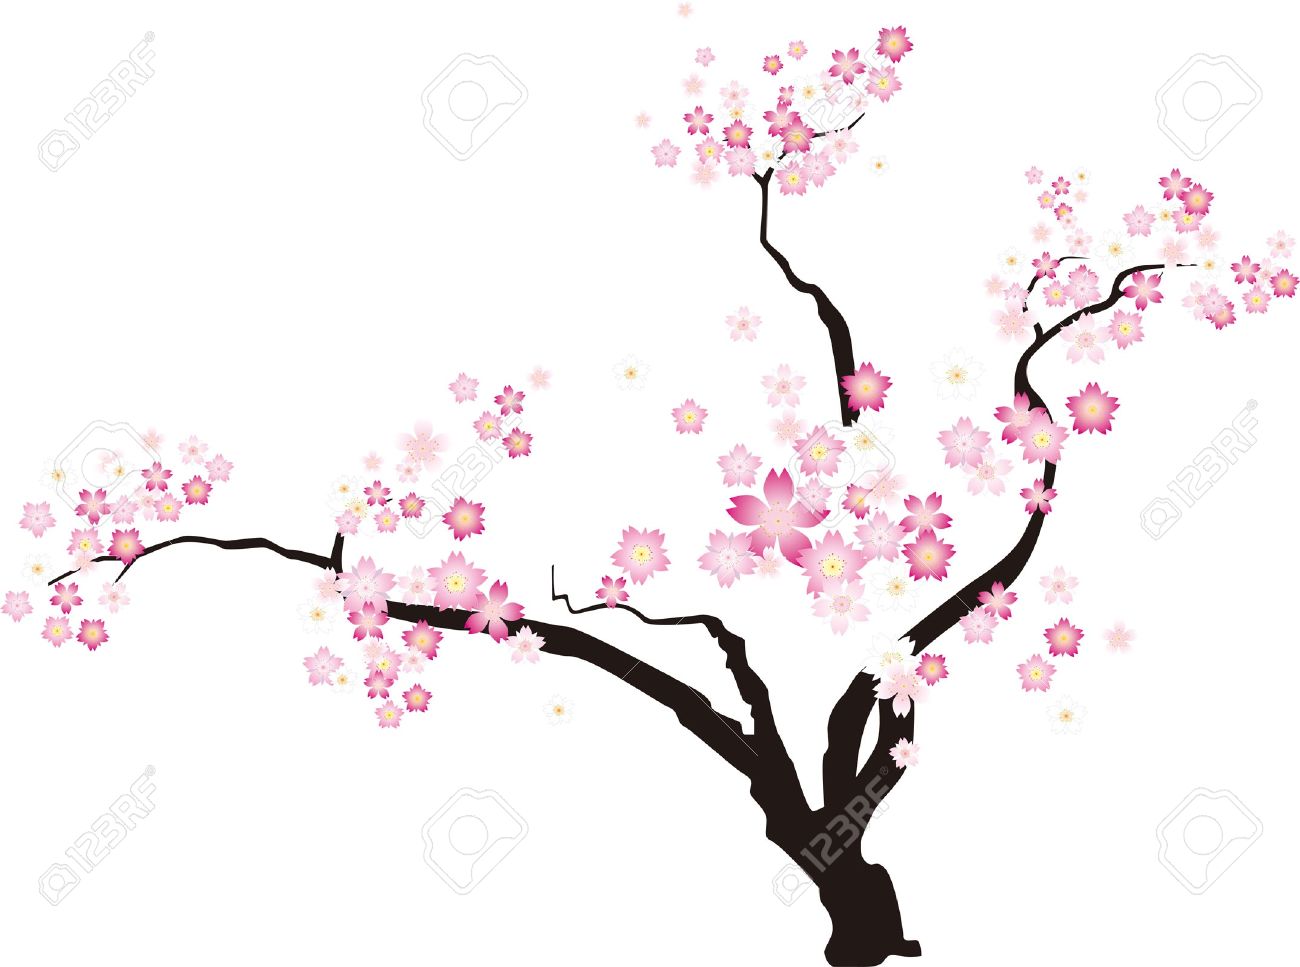 Ume Blossom clipart #15, Download drawings